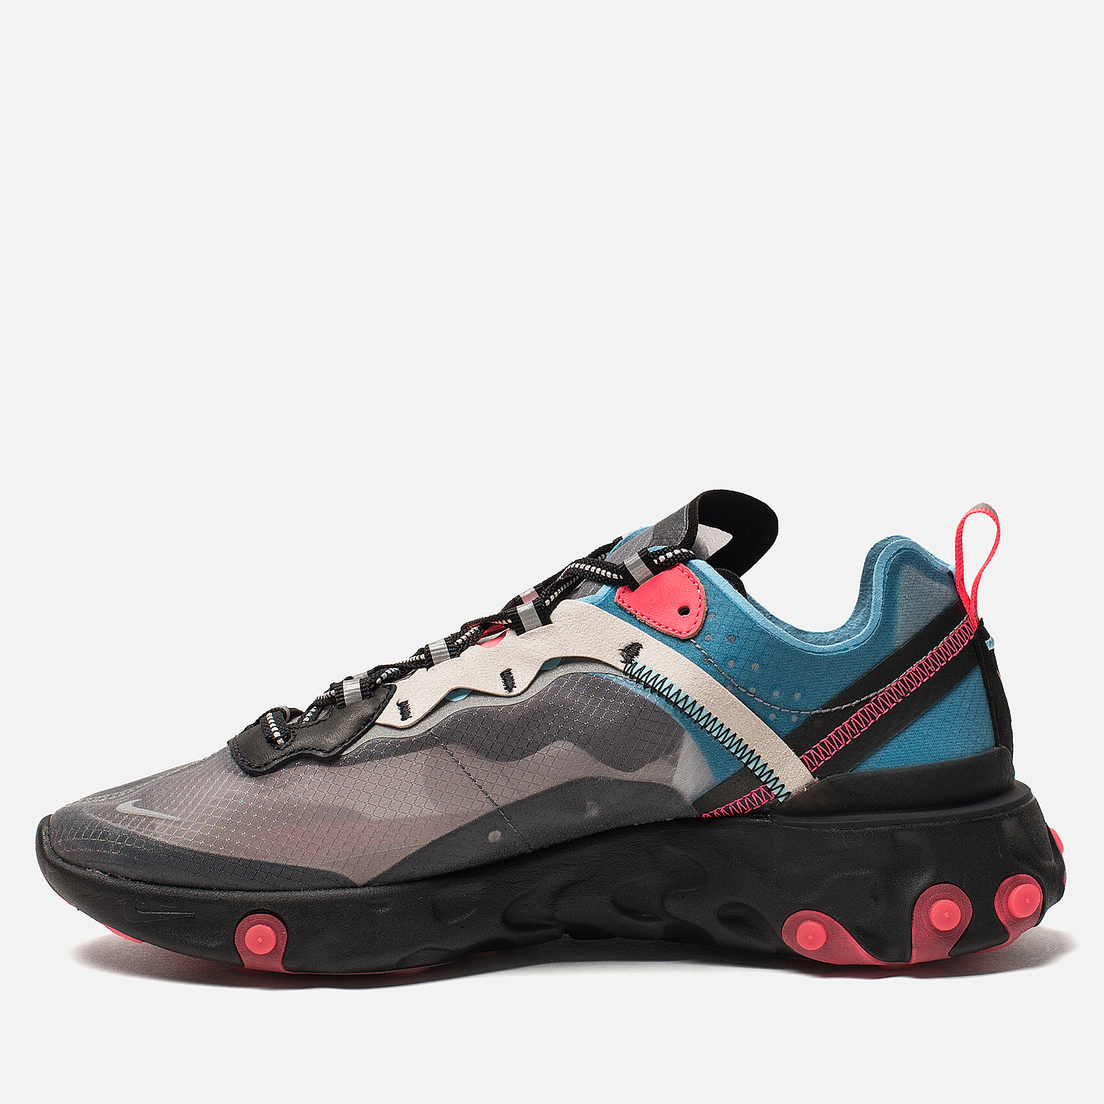 nike react element grey blue red